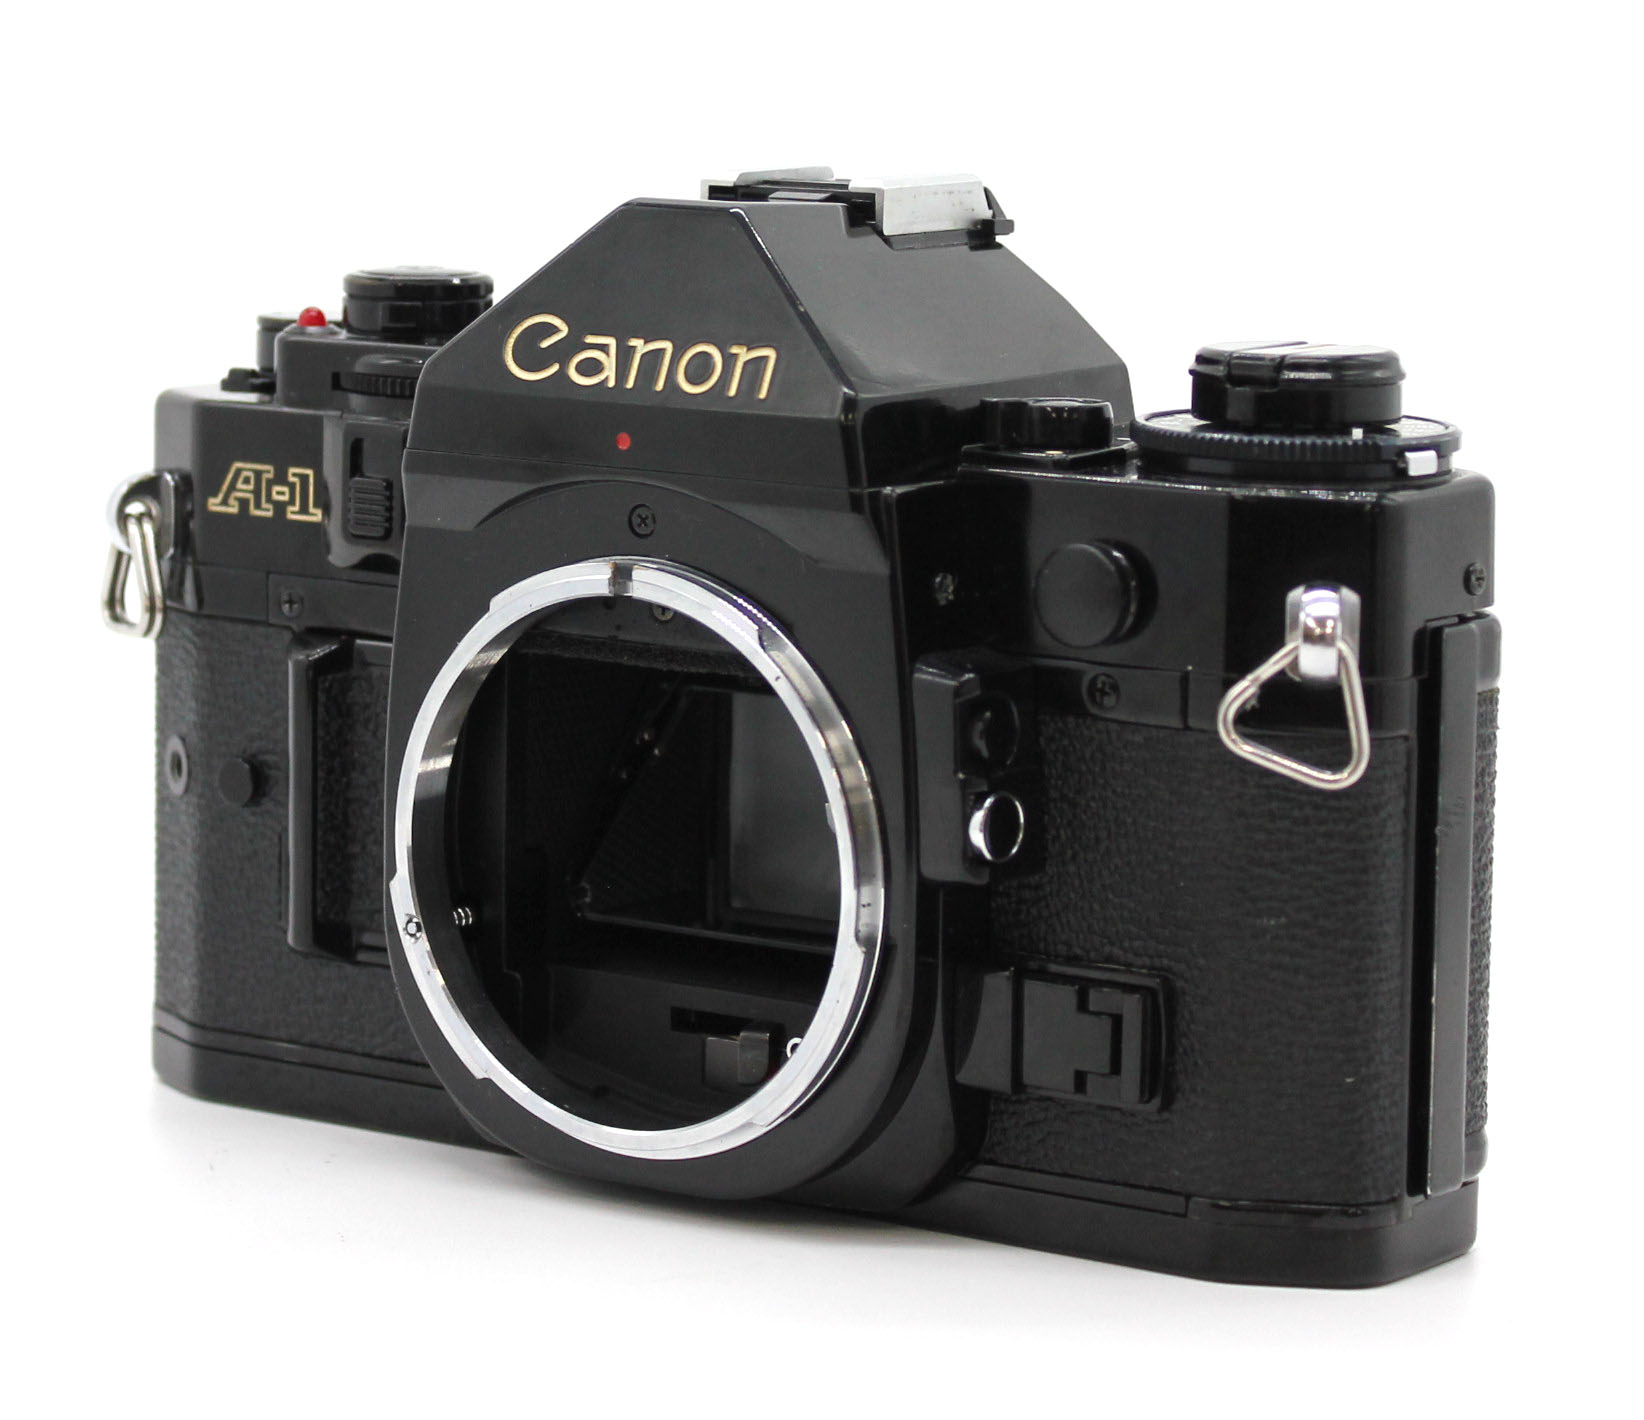  Canon A-1 35mm SLR Black with New FD 50mm F1.8 Lens from Japan Photo 1